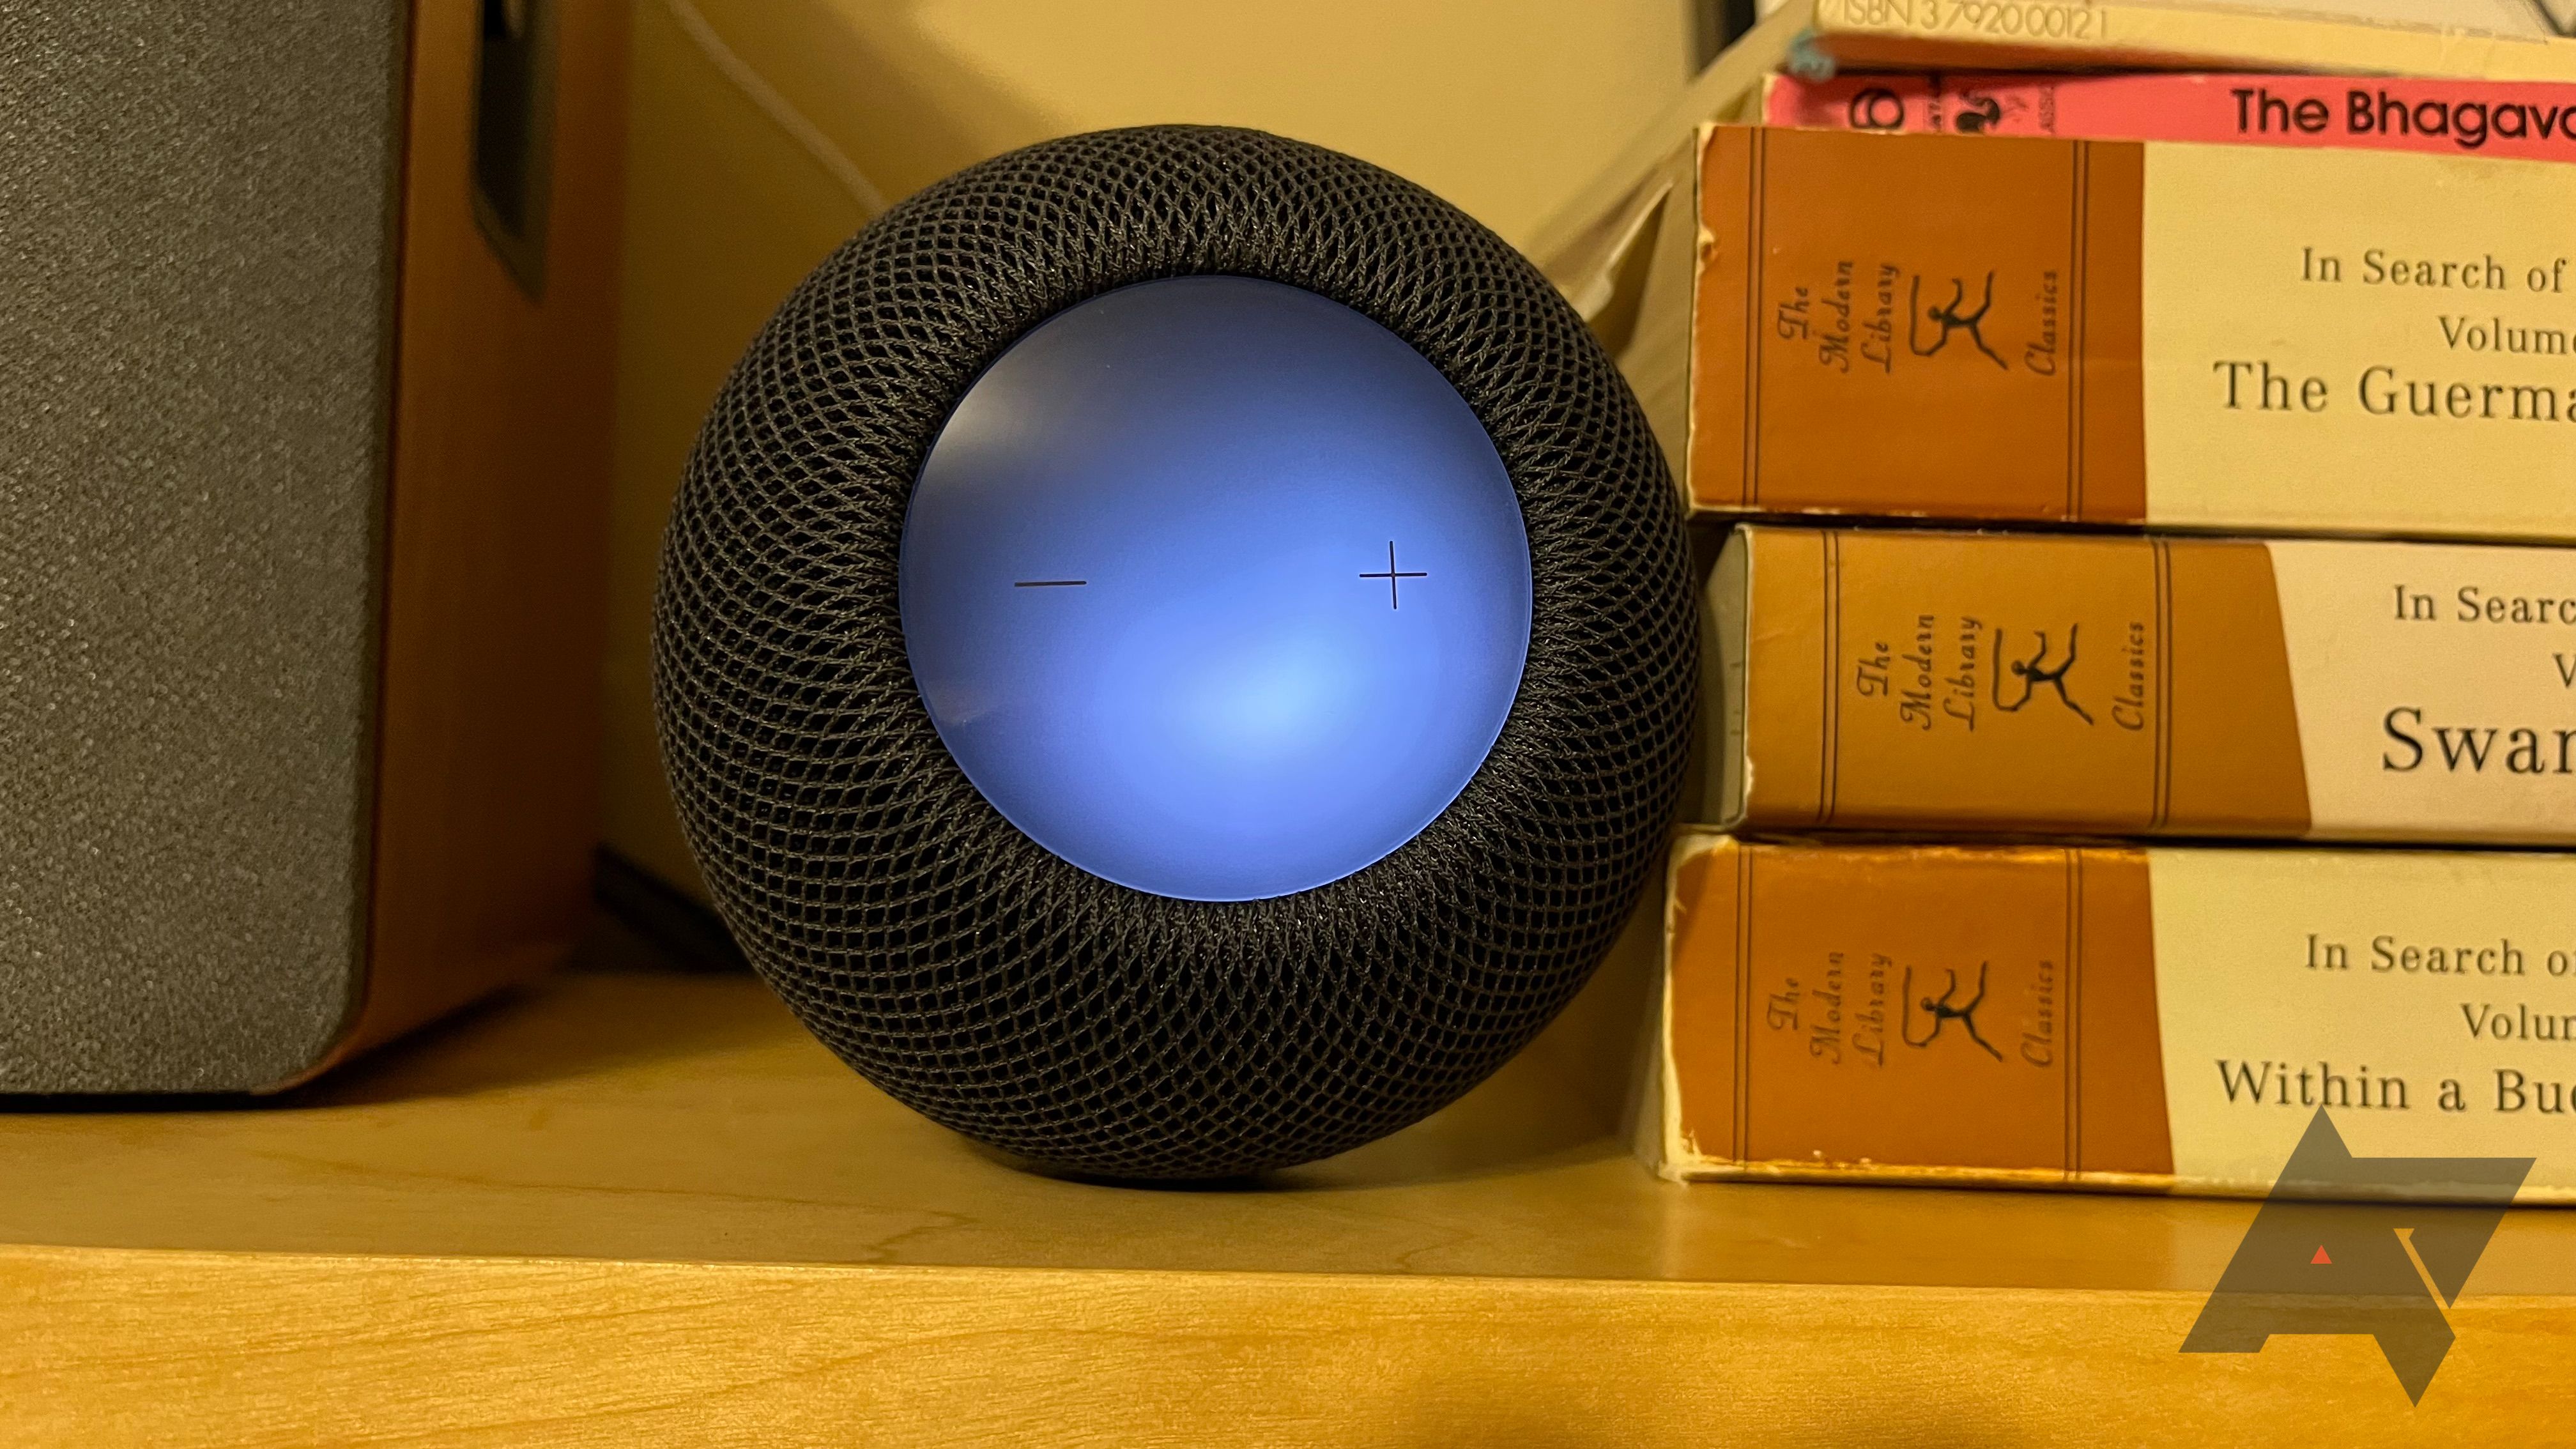 HomePod mini, now in color